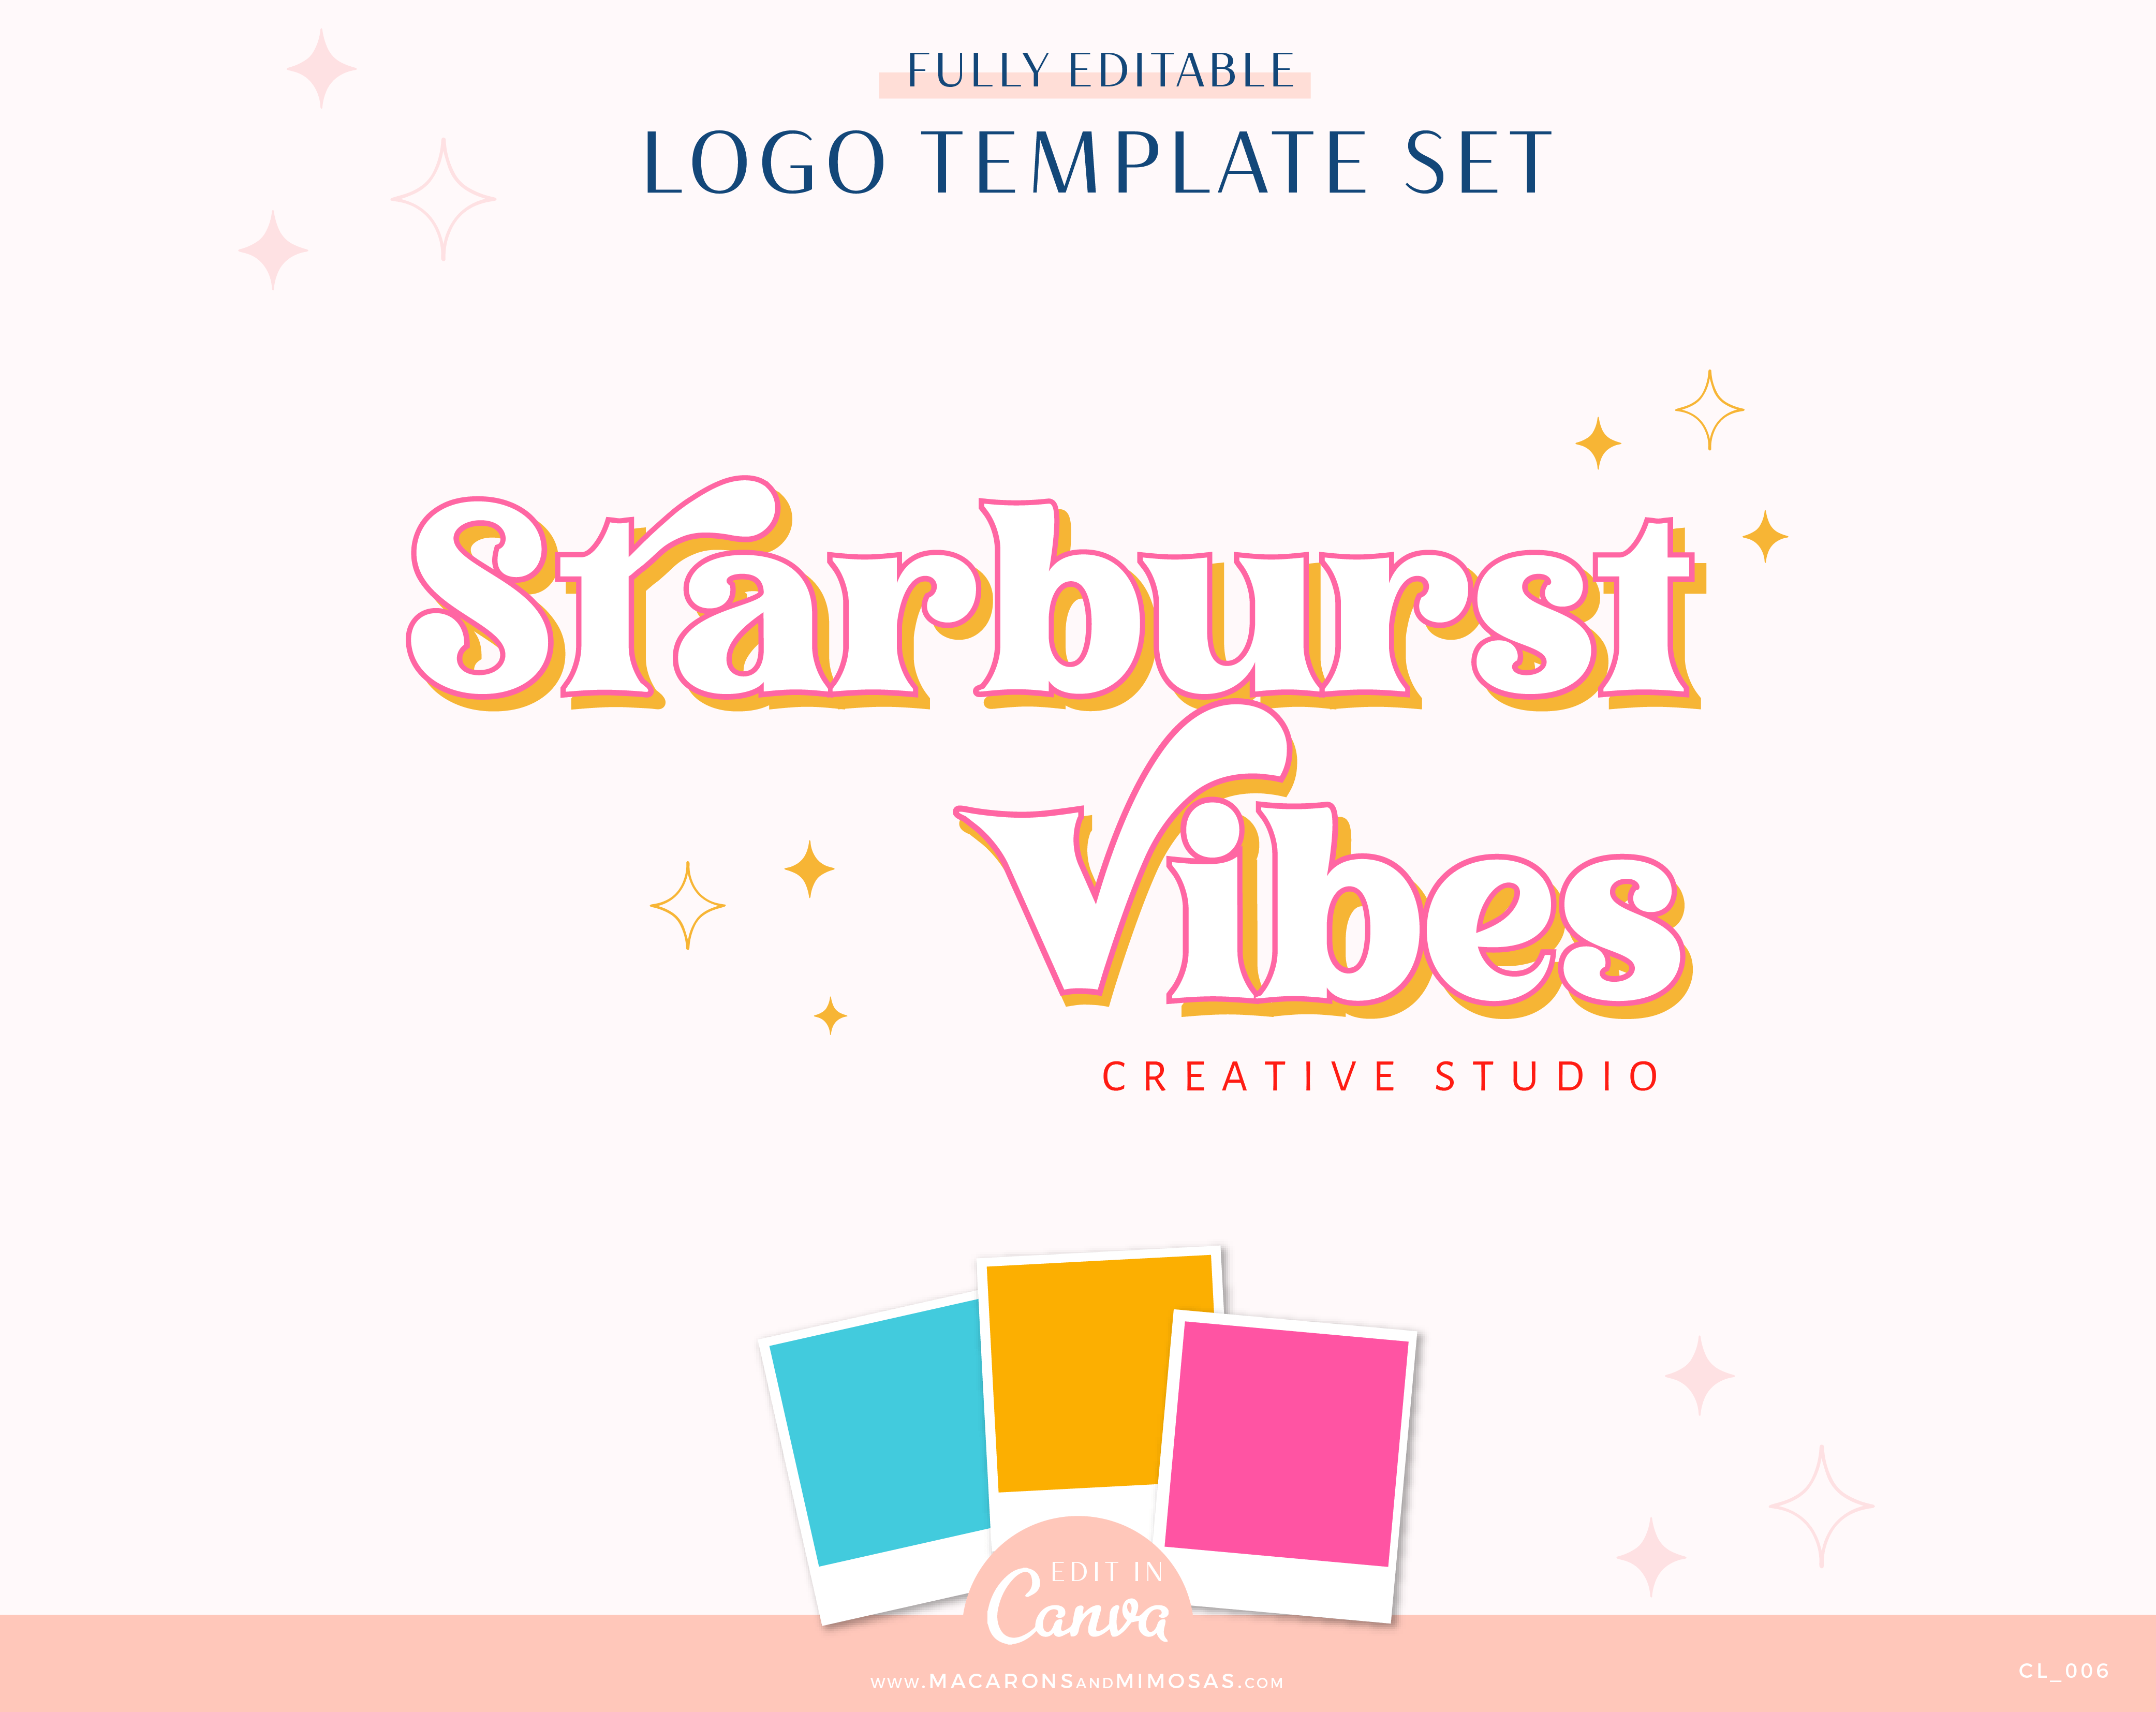 Starburst vibes font Logo editable in Canva includes a Main Logo, Secondary logo, Typography suggestions Stock Photos, and more! 